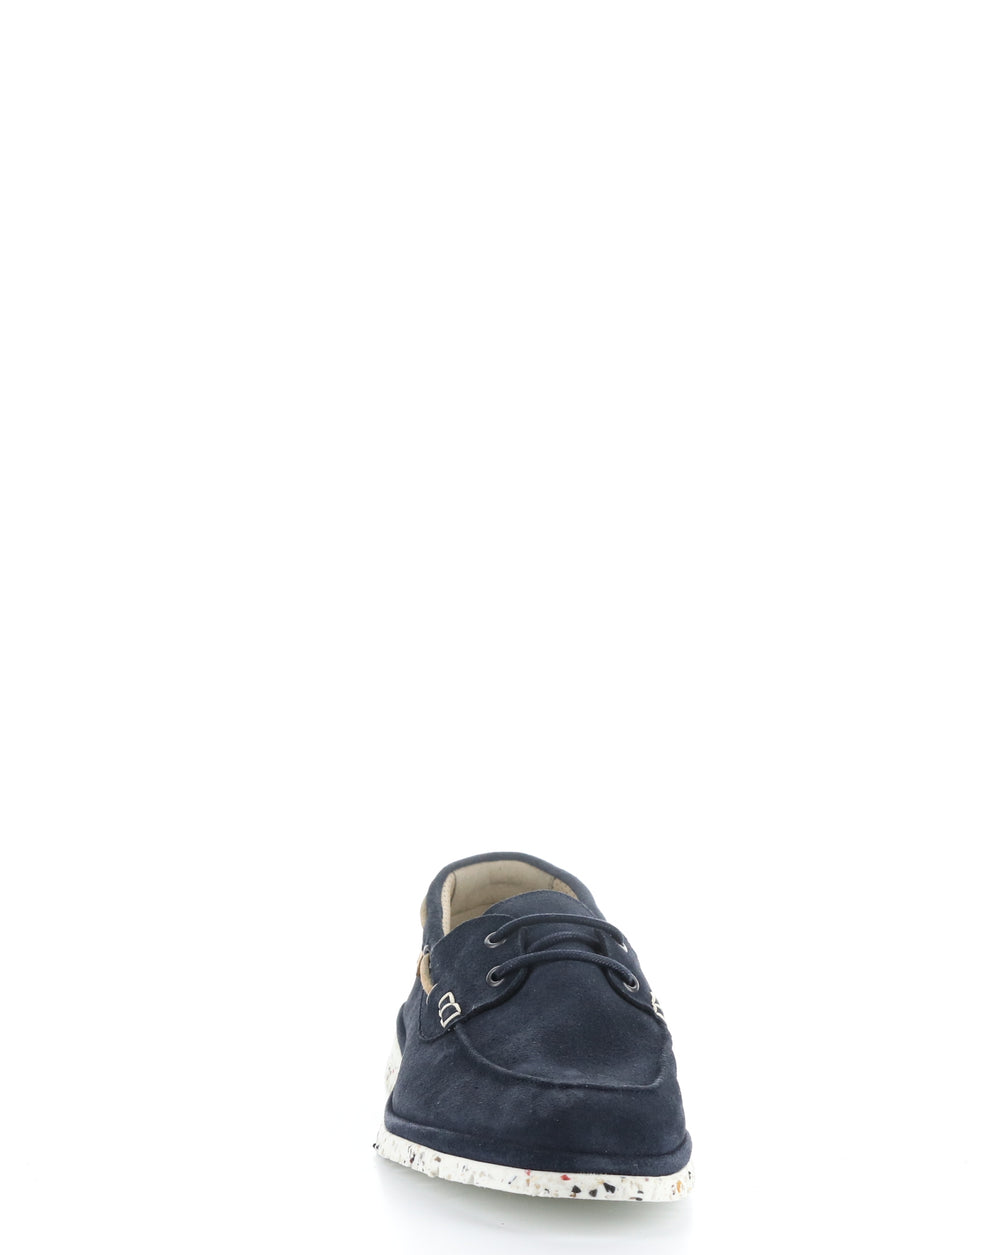 11910A NAVY Round Toe Shoes